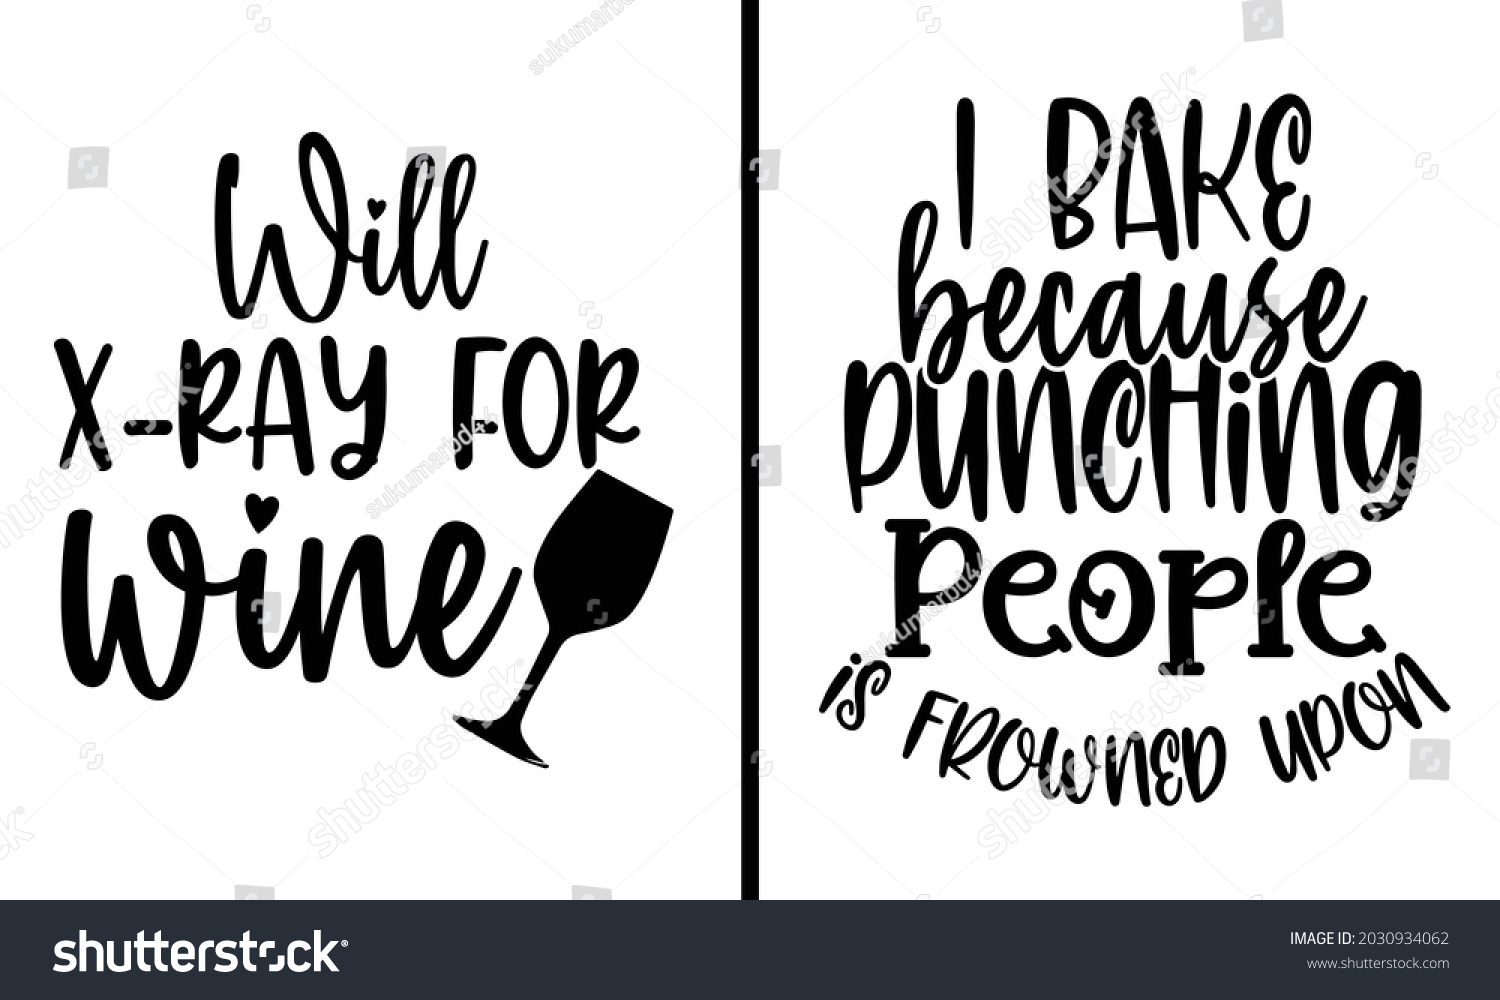 SVG of I bake because punching people is frowned upon 2 Design Bundle - Food drink t shirt design, Hand drawn lettering phrase, Calligraphy t shirt design, svg Files for Cutting Cricut and Silhouette, card svg